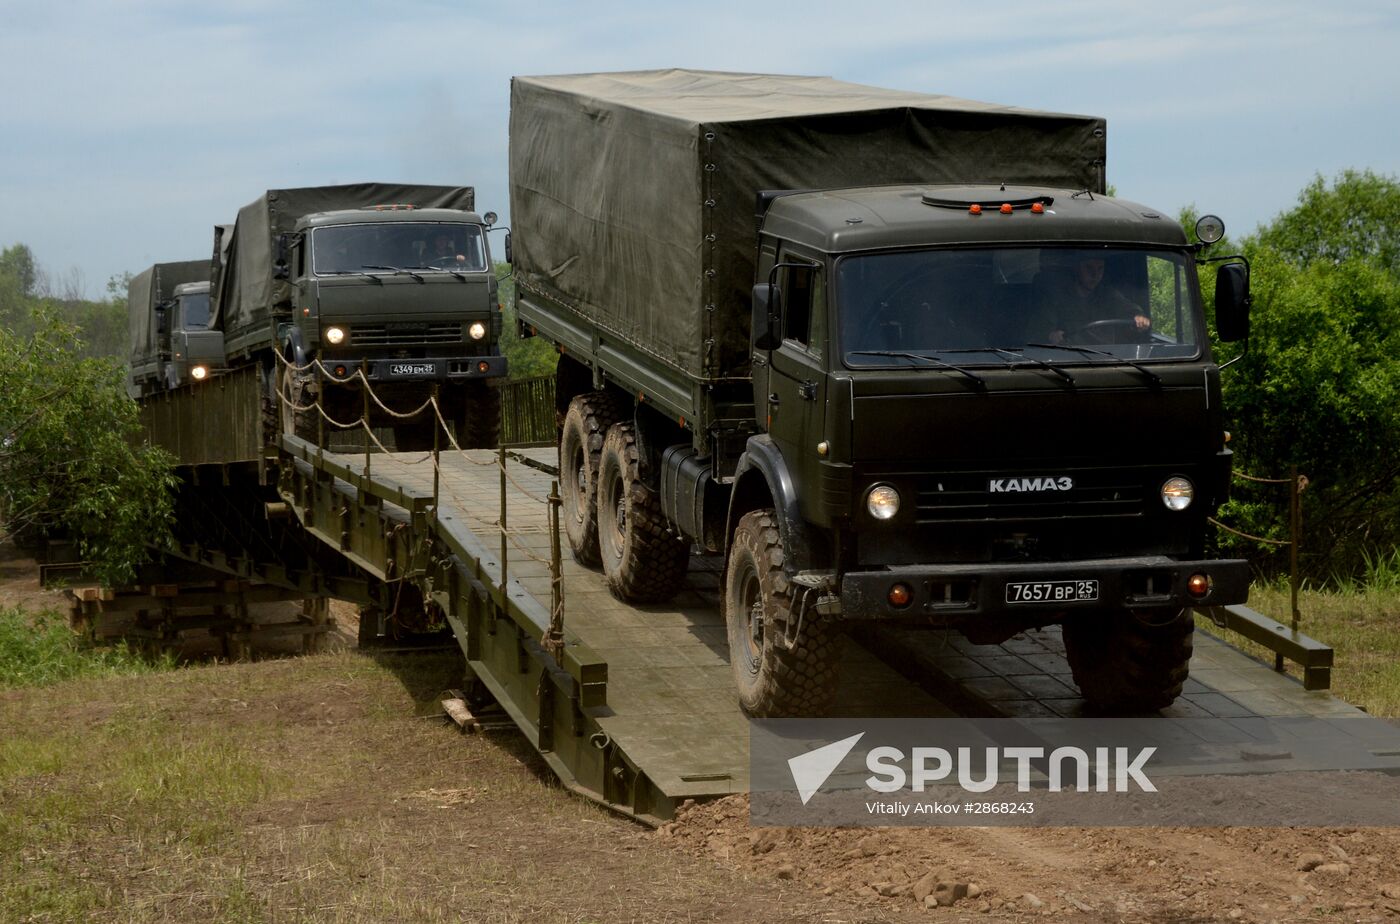 Command post exercise in Primorye Territory